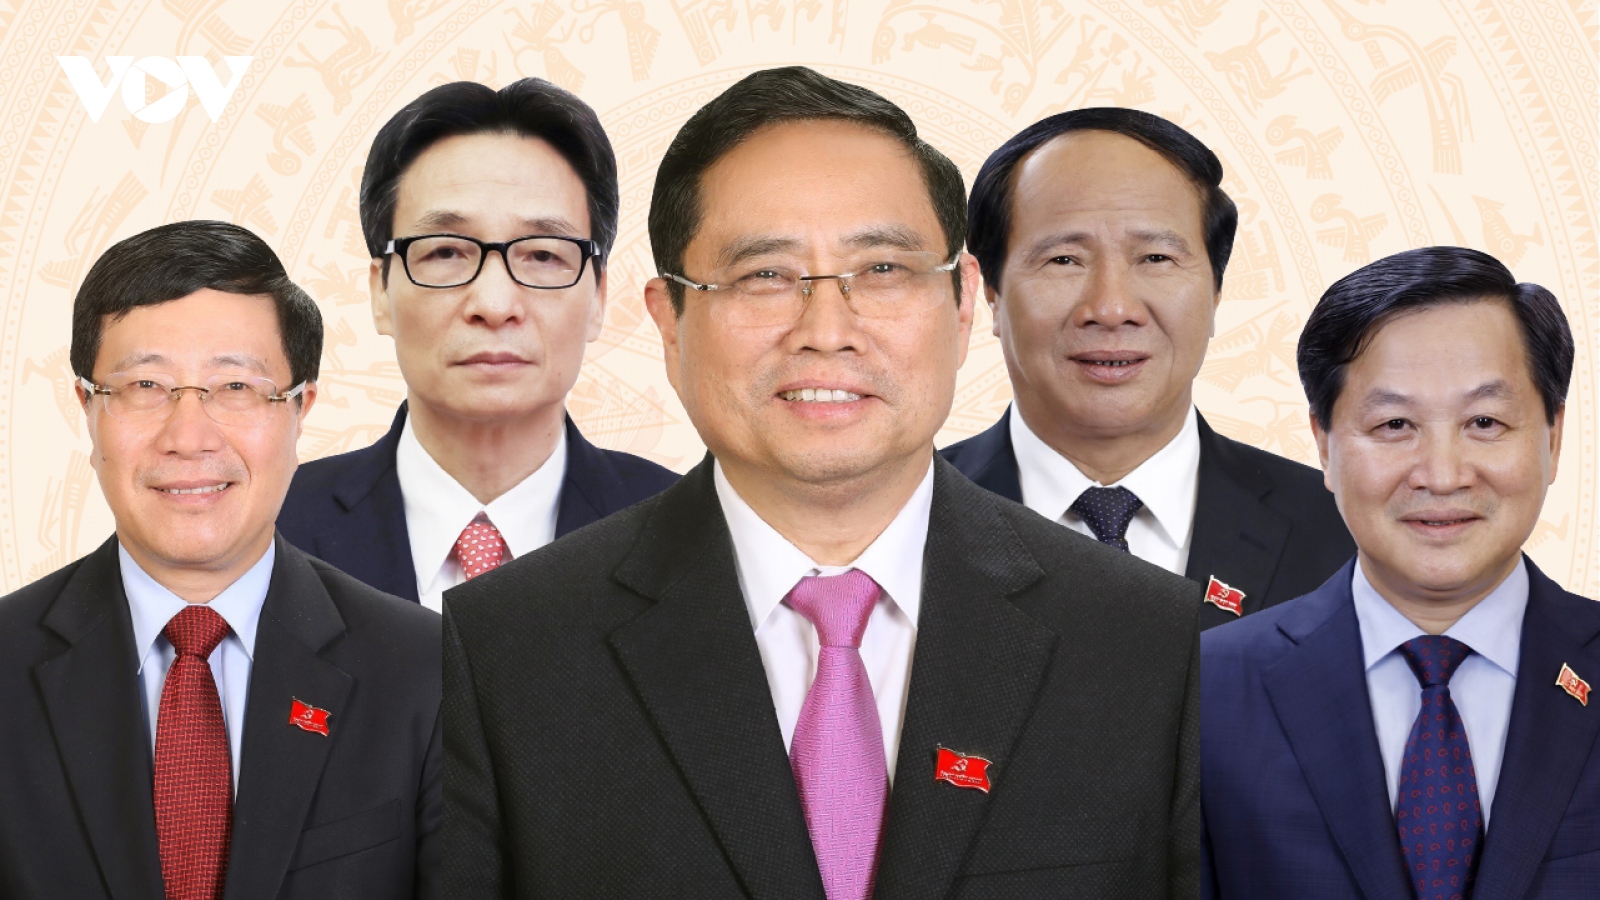 The 27-member Cabinet of Vietnam for the 2021-2026 term